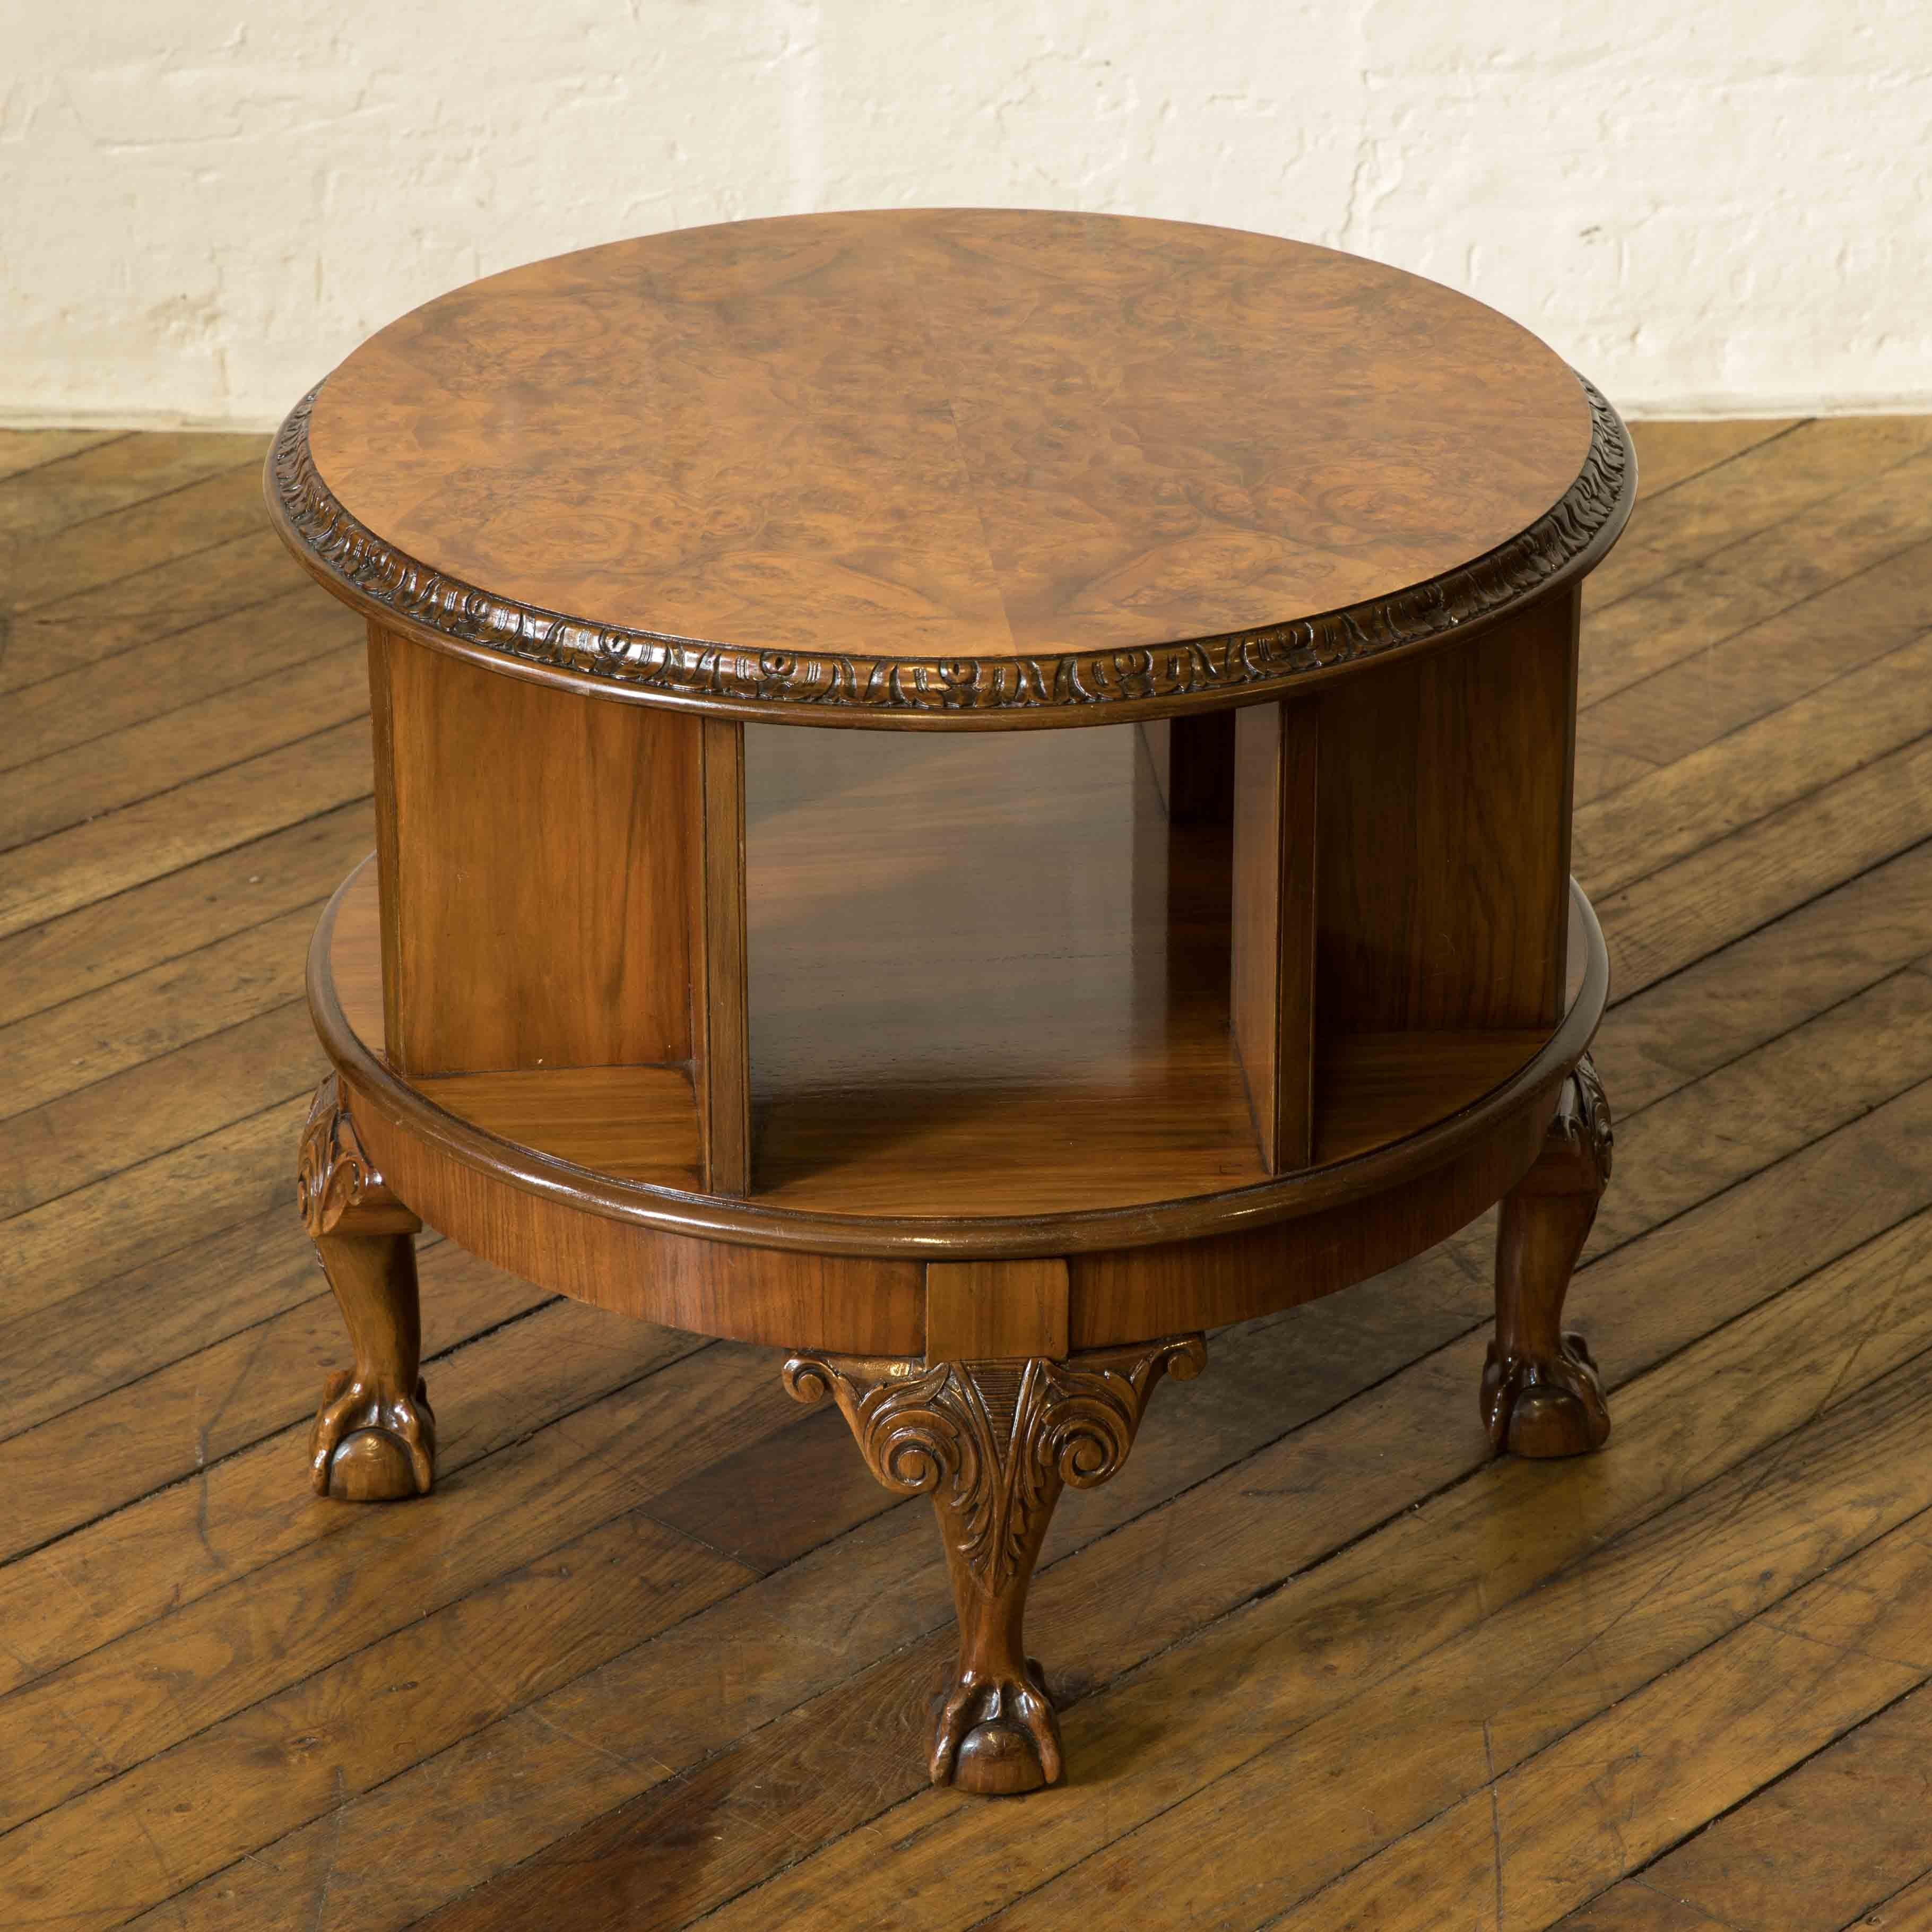 Early 20th Century Burr Walnut Revolving Bookcase/Coffee Table